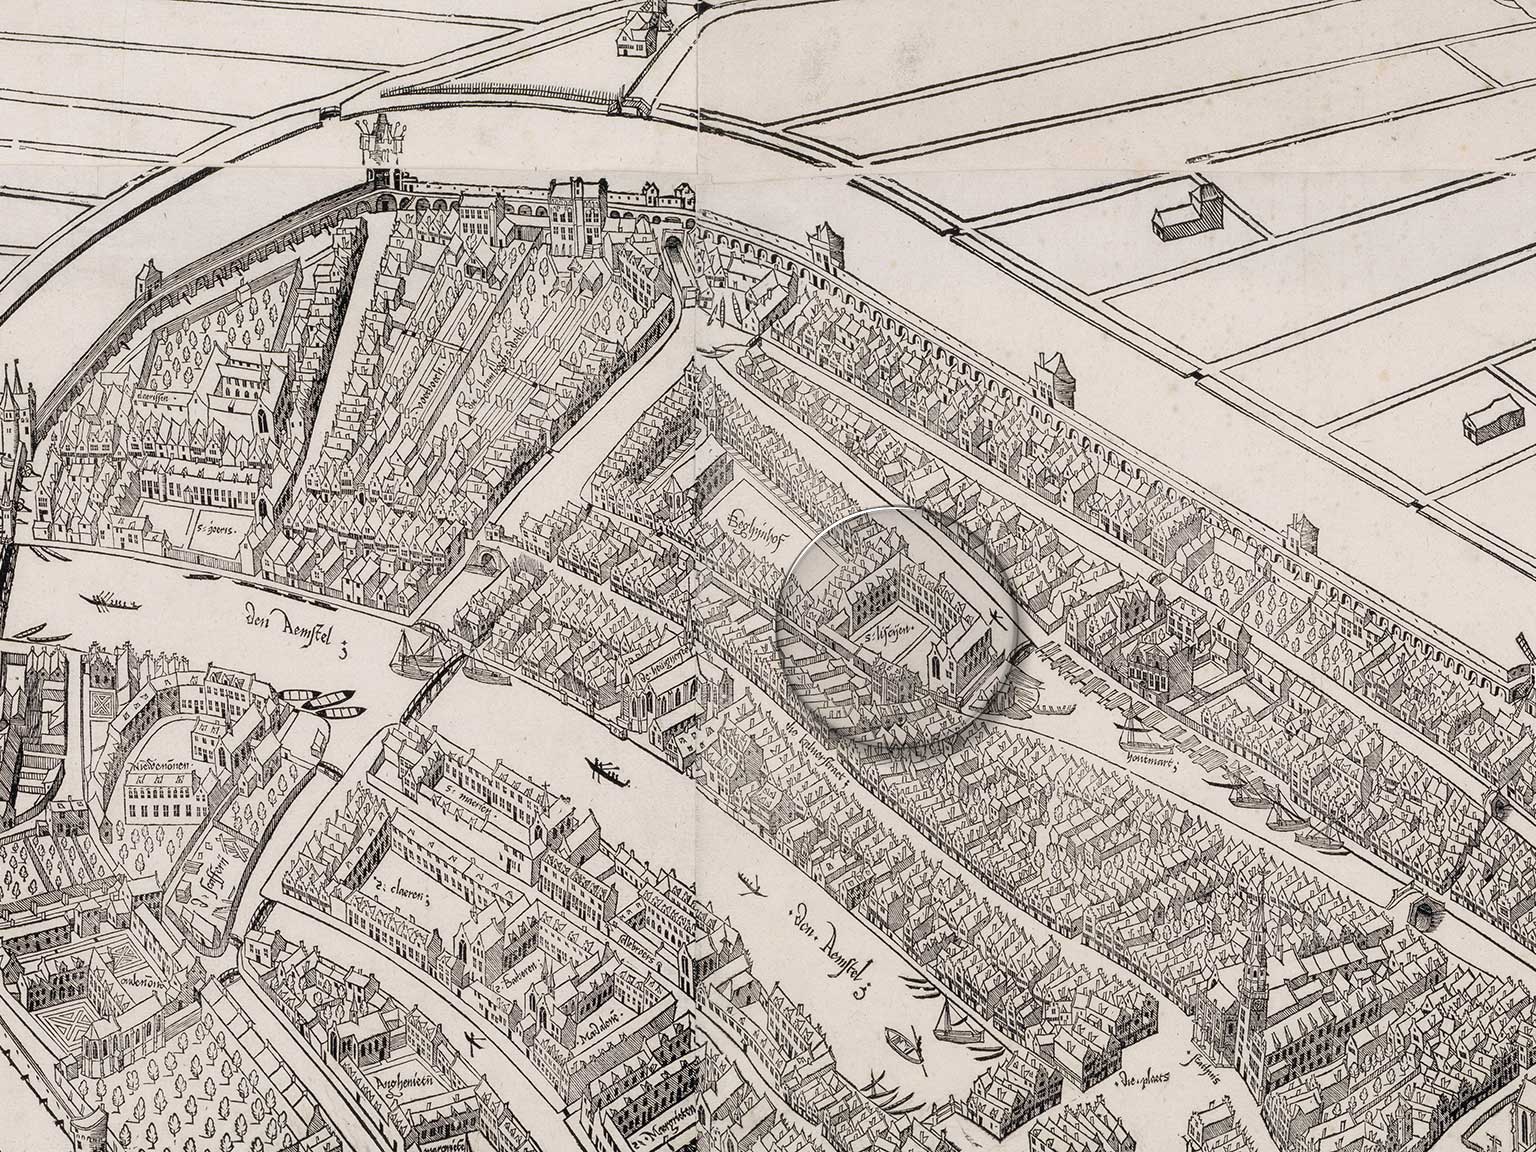 Former Saint Lucia Convent from 1414 in Amsterdam on a map by Cornelis Anthonisz from 1544